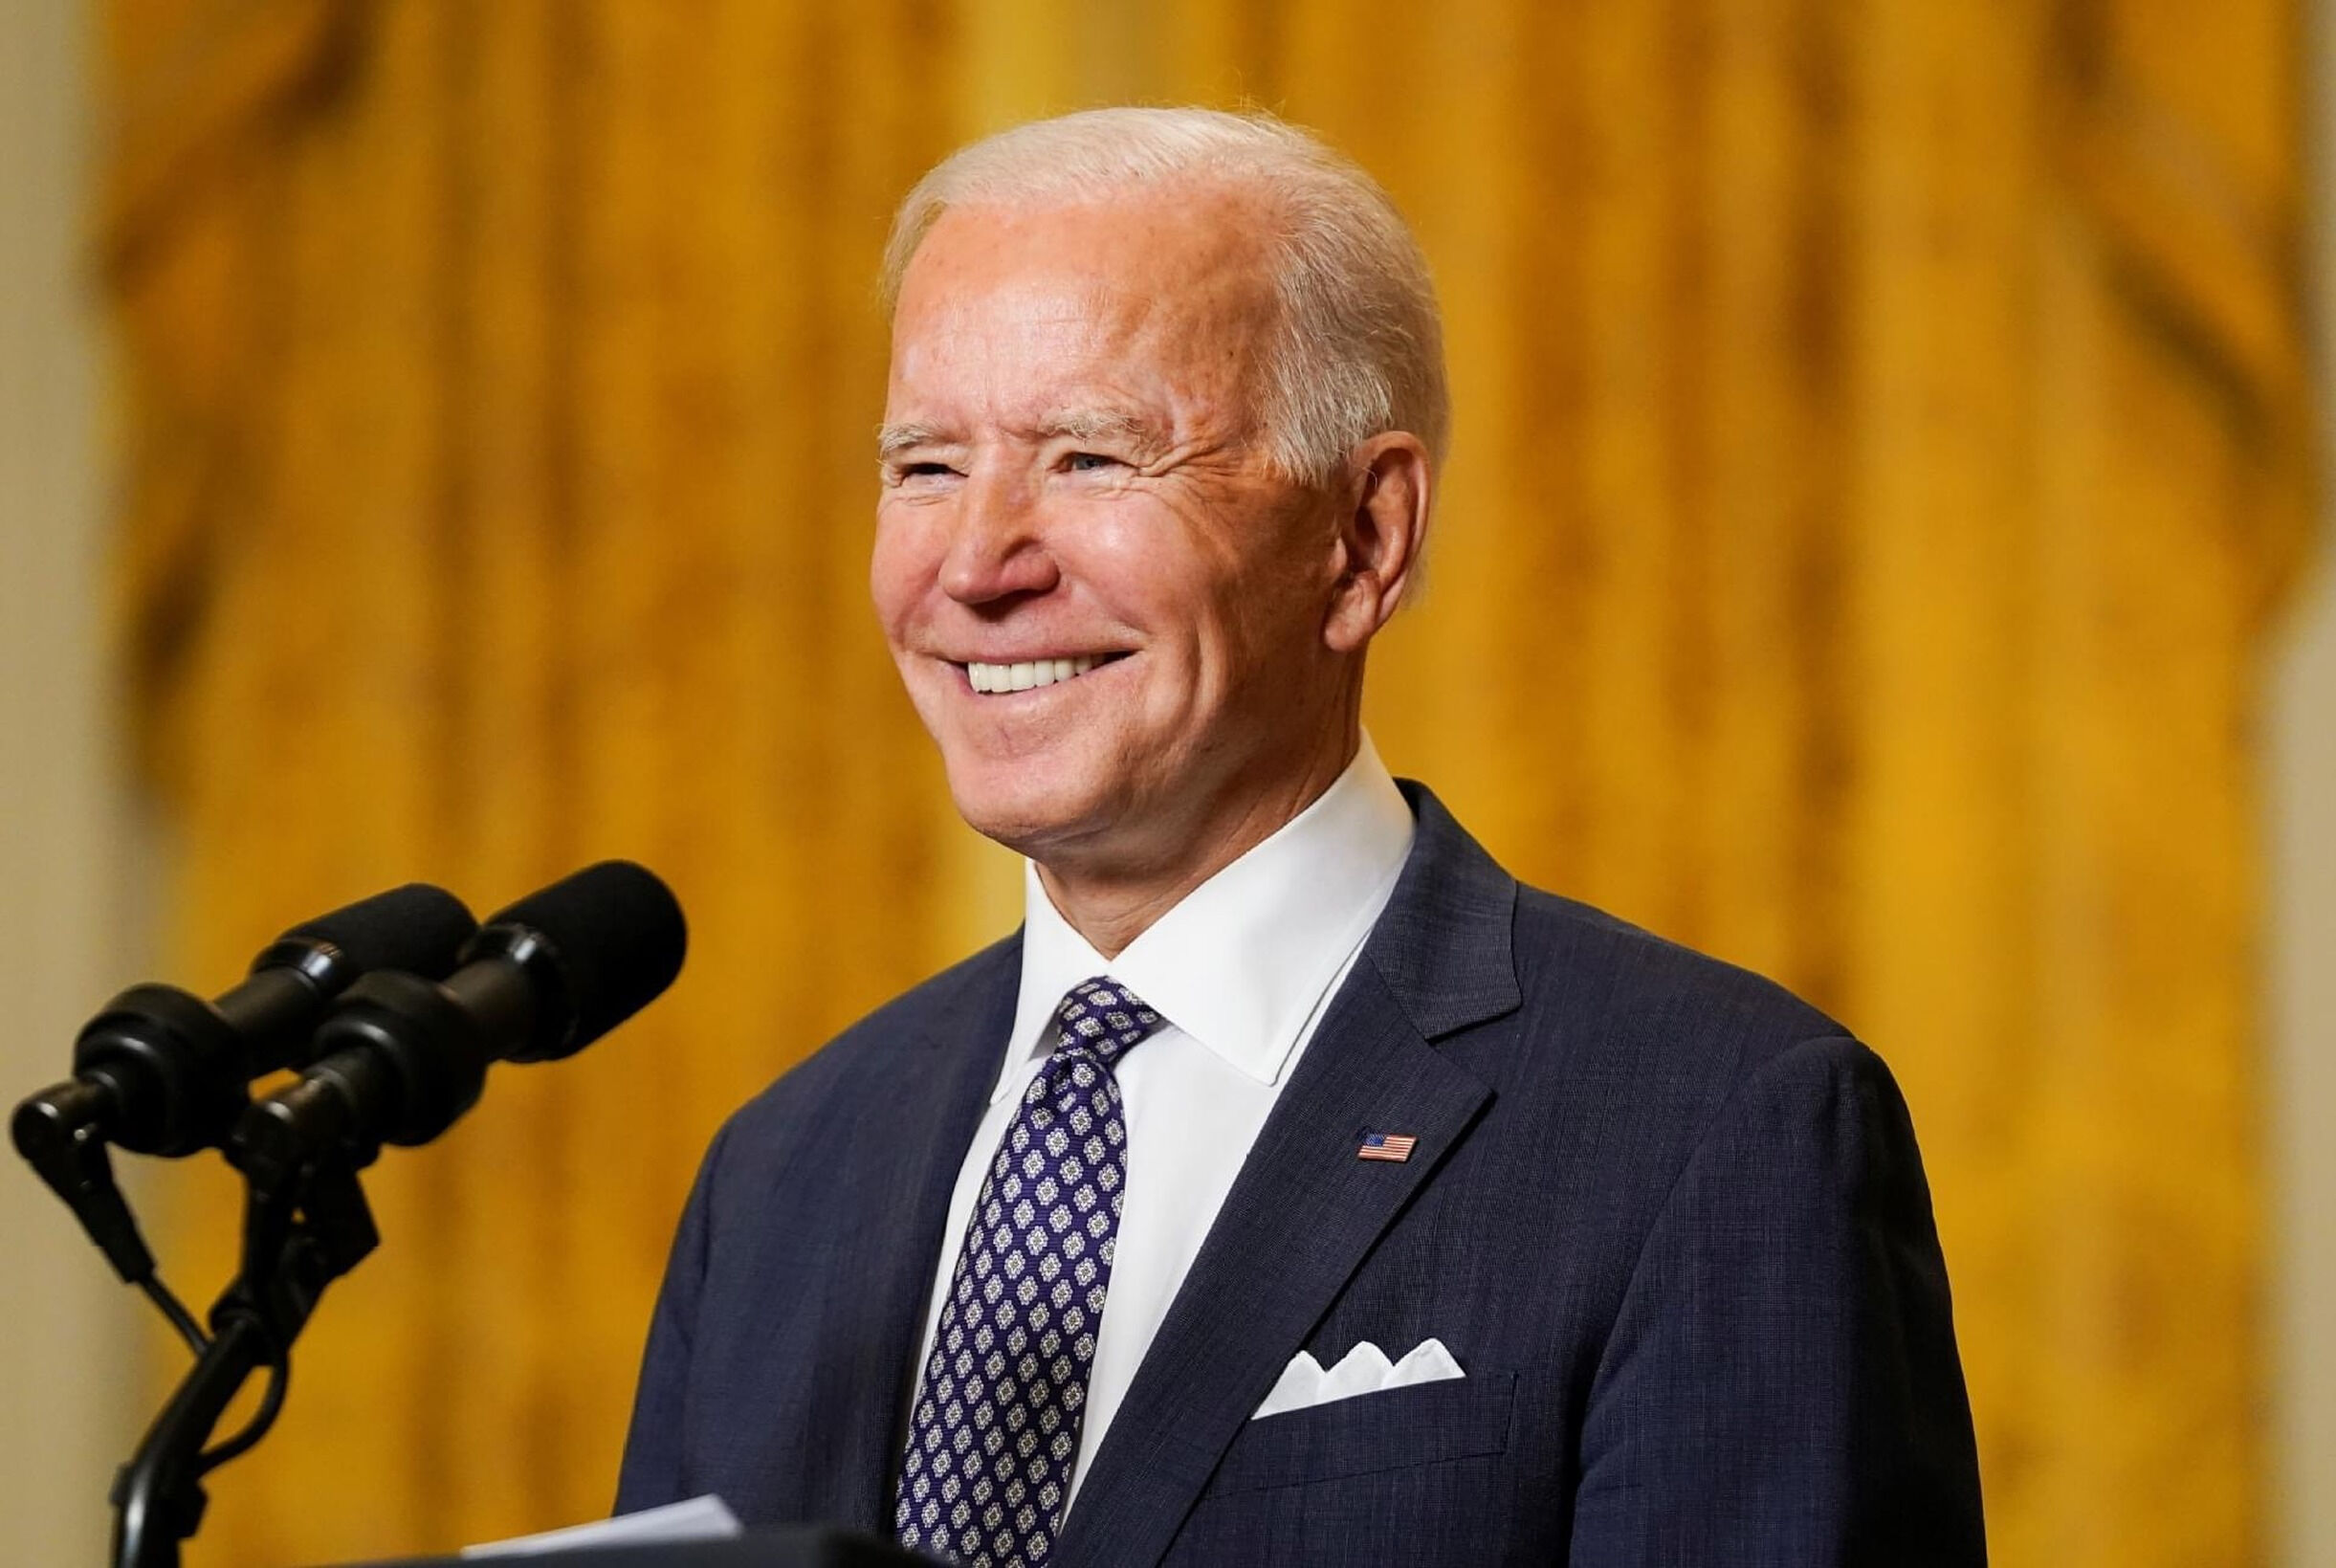 31 March 2021: This picture shows American President Joe Biden giving strength during press conference